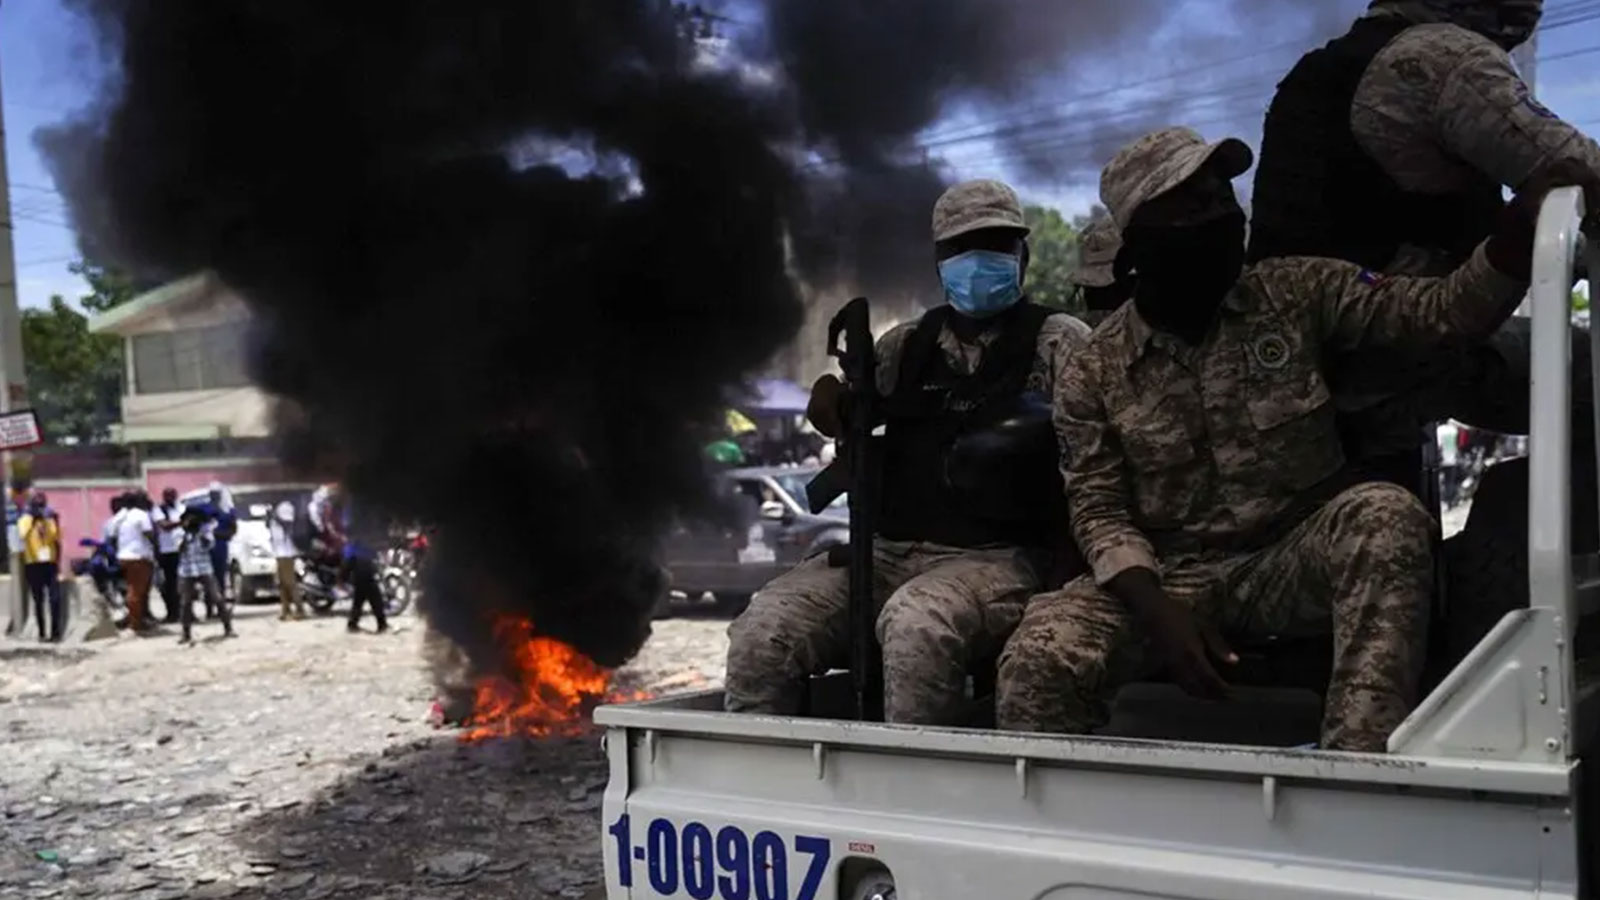 Haitian police passed a burning barricade set up by protesters. The police are often overwhelmed by gangs who have access to more powerful weapons.